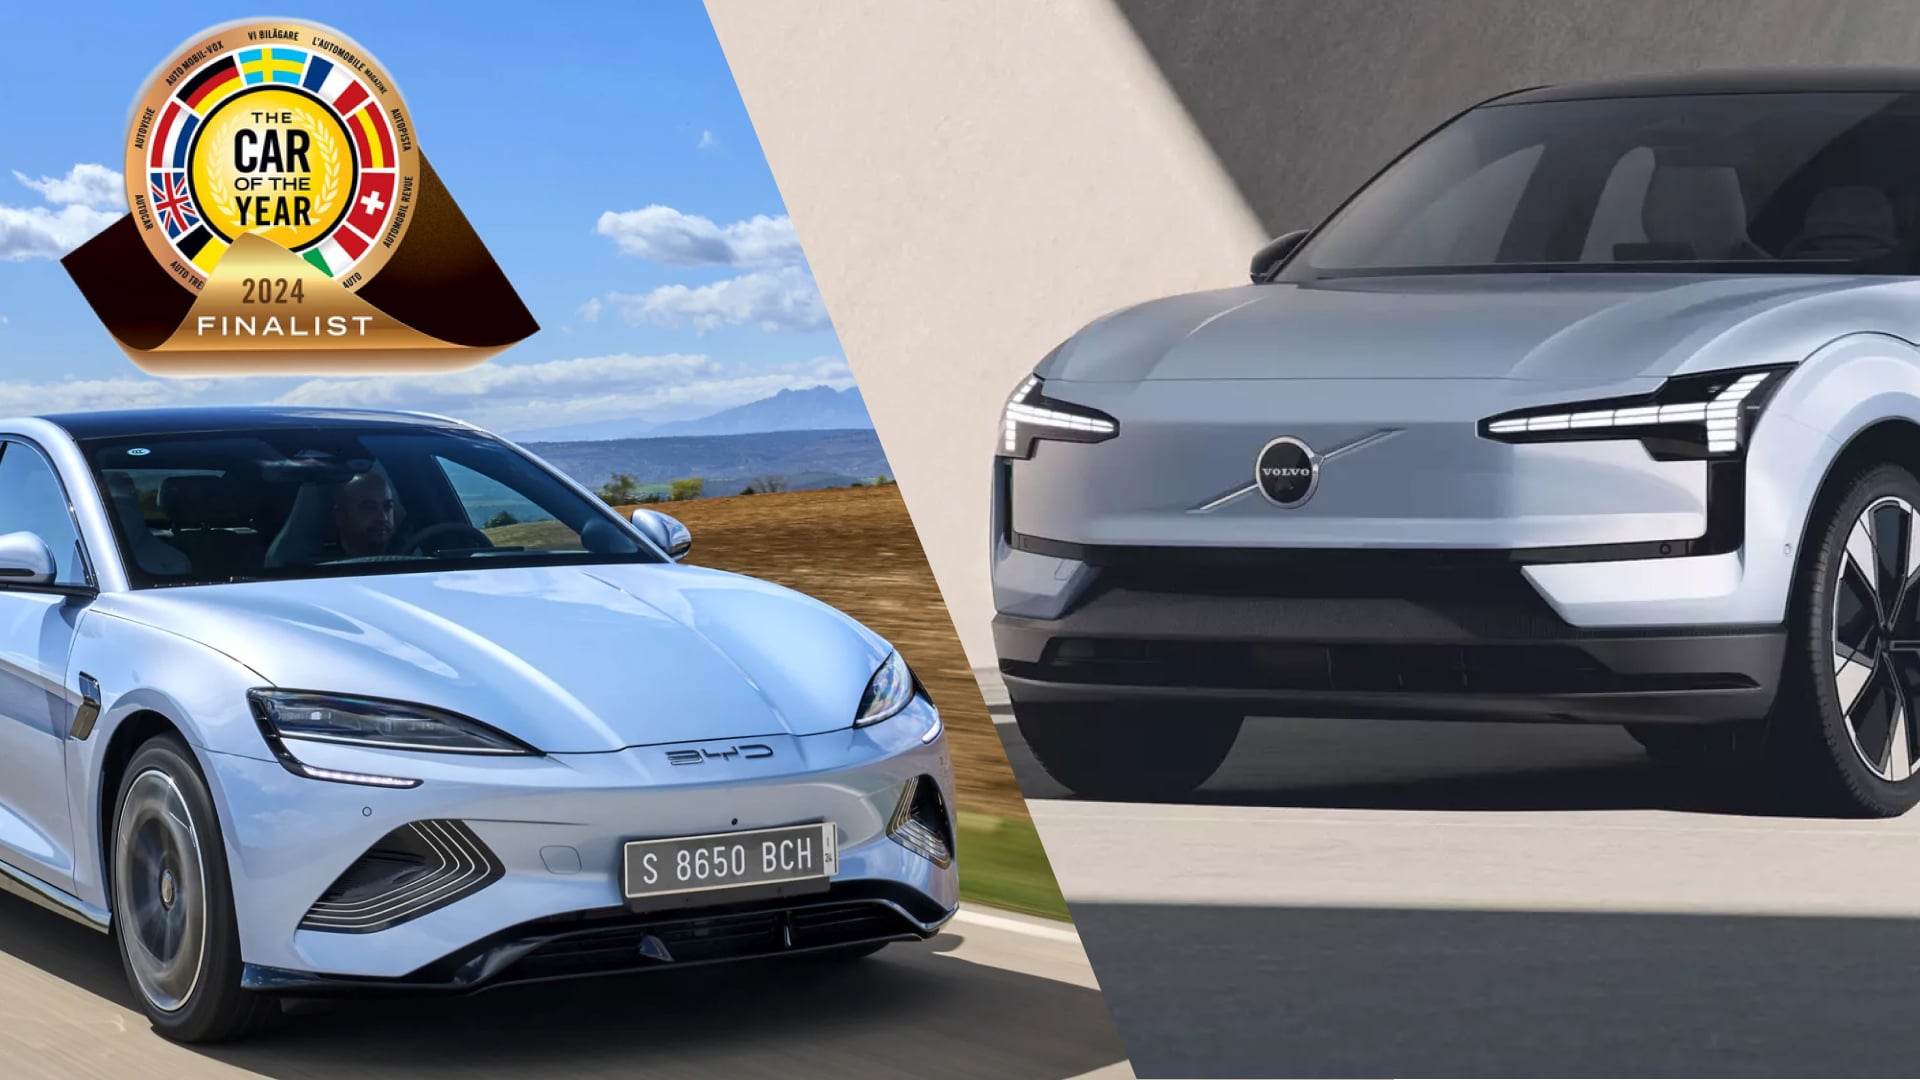 Two Chinese cars became finalists for The Car of the Year in Europe 2024